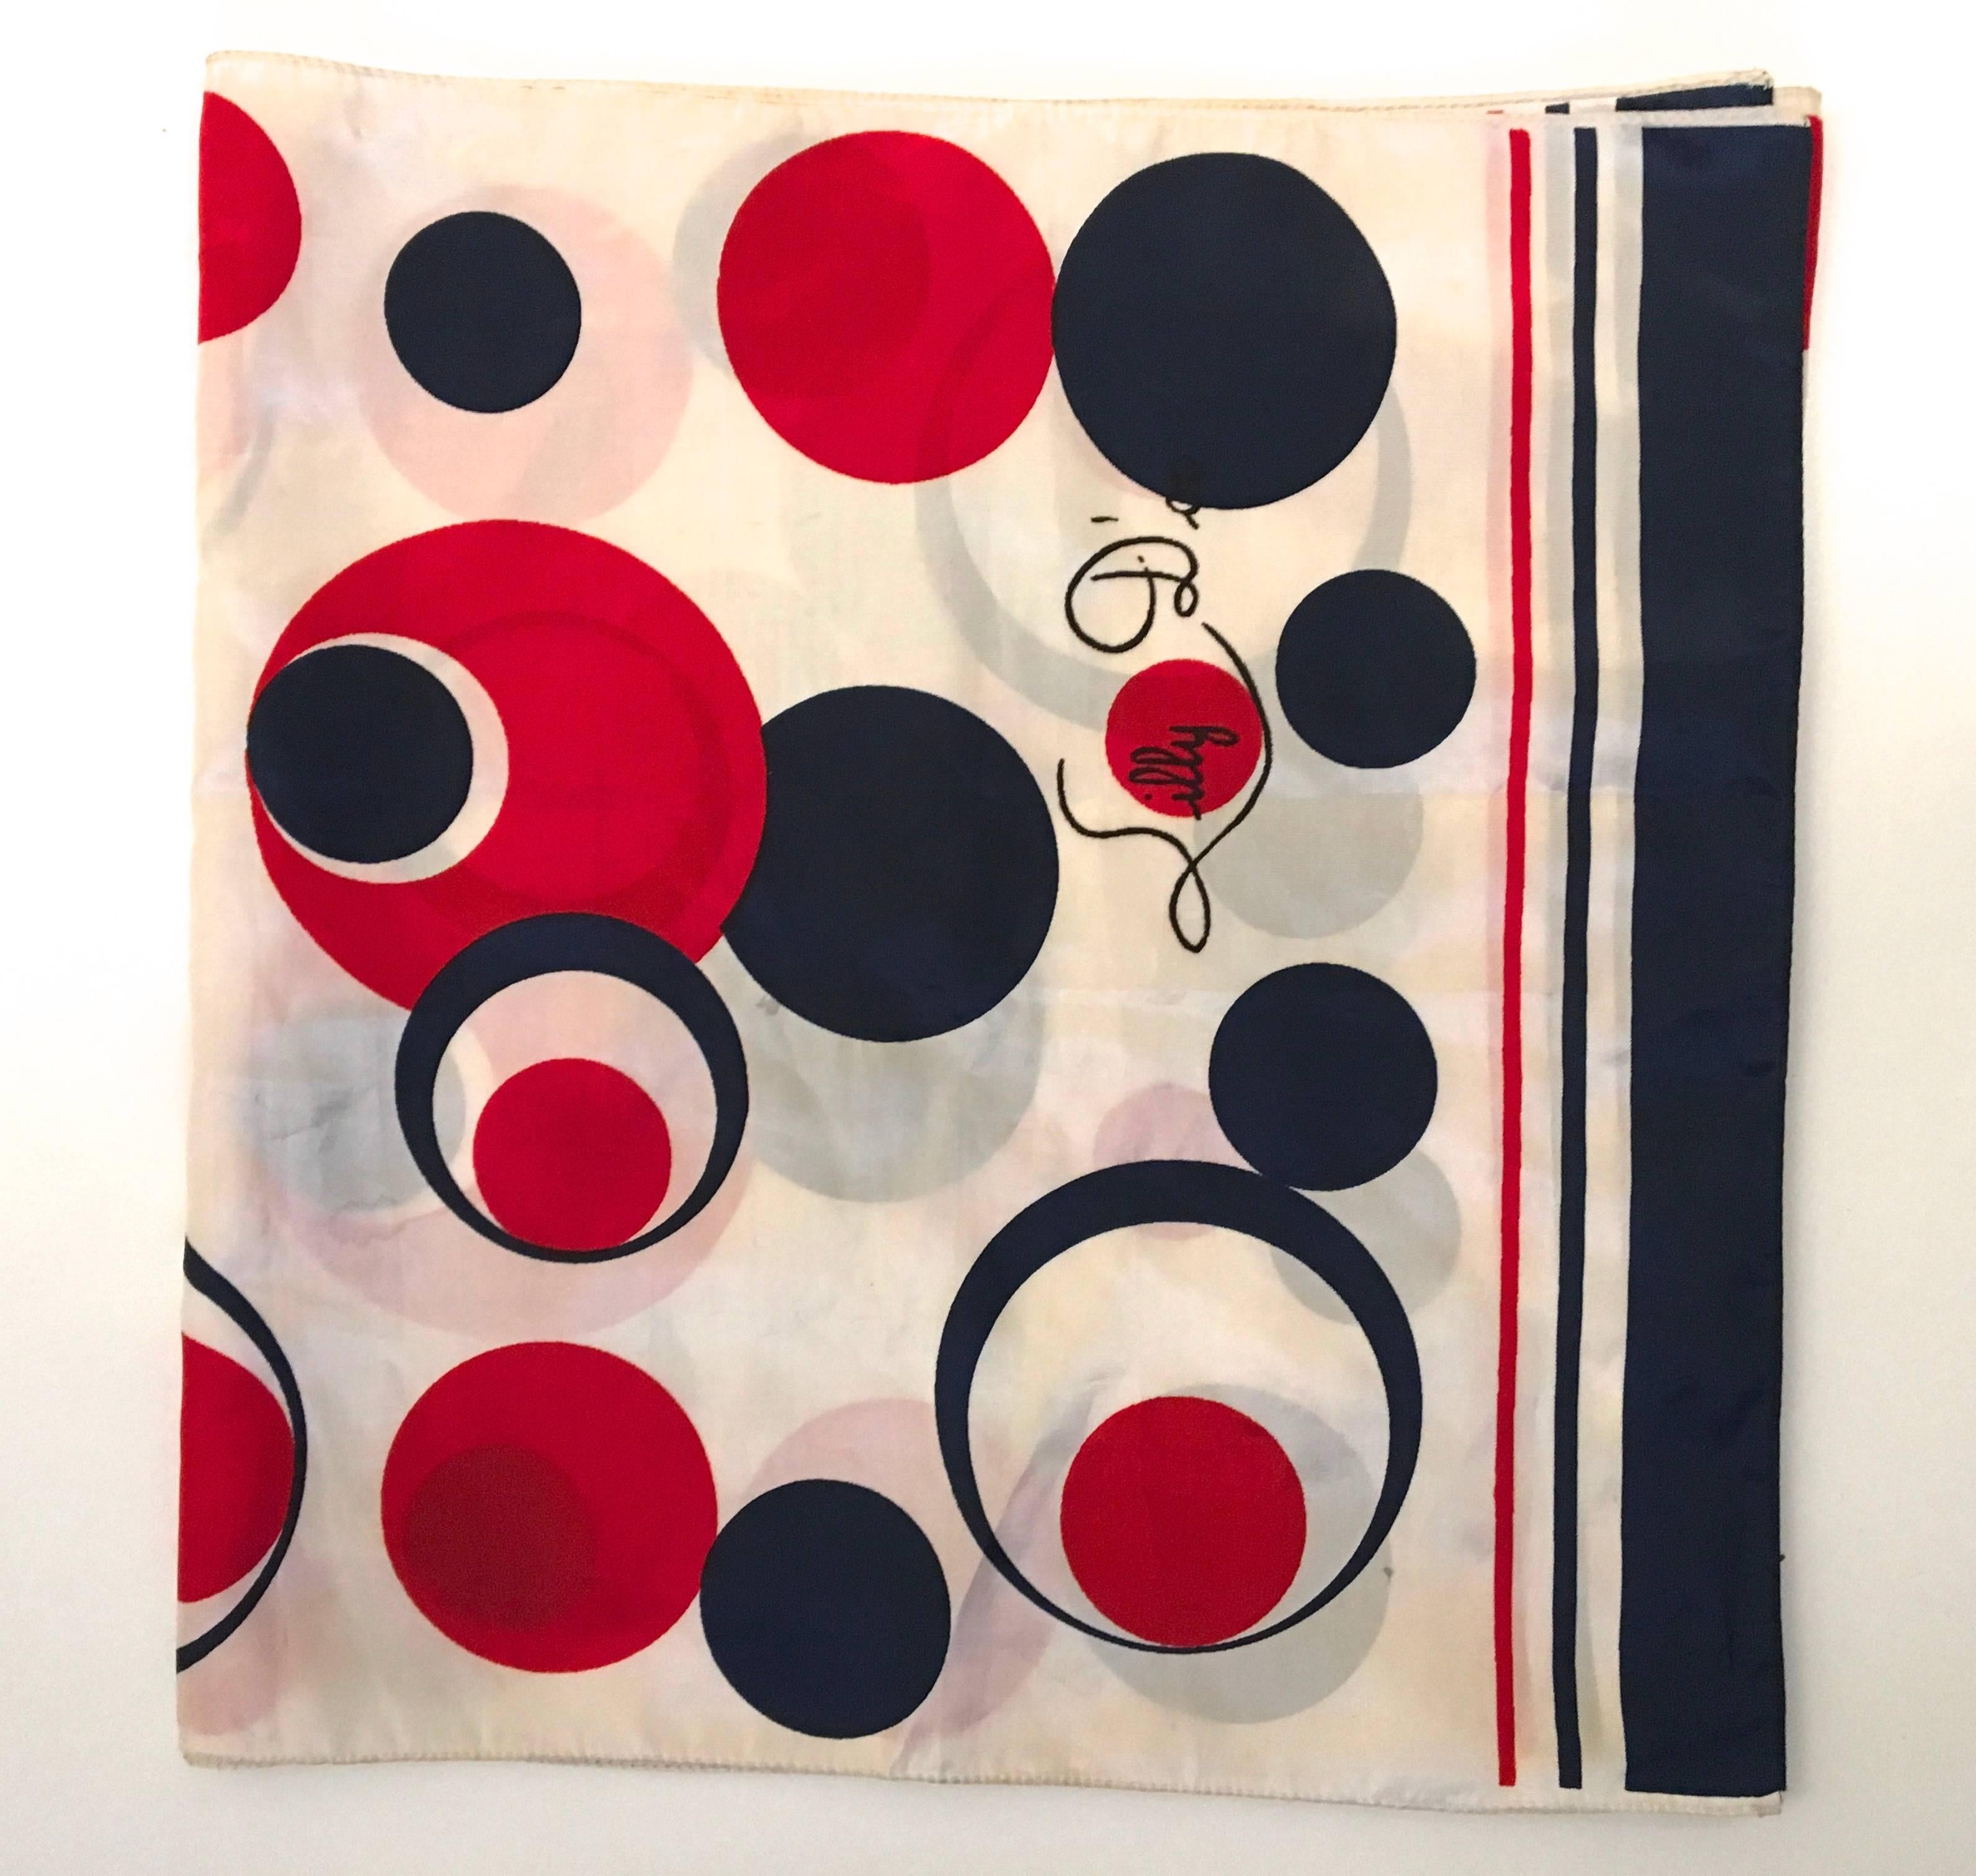 Presented here is a beautiful vintage scarf from Lilly D'or. This rare scarf is comprised of a series of mod-geometric circles. The scarf is from the 1960's. The circles are red and dark navy blue against a white backdrop. There is a red and blue